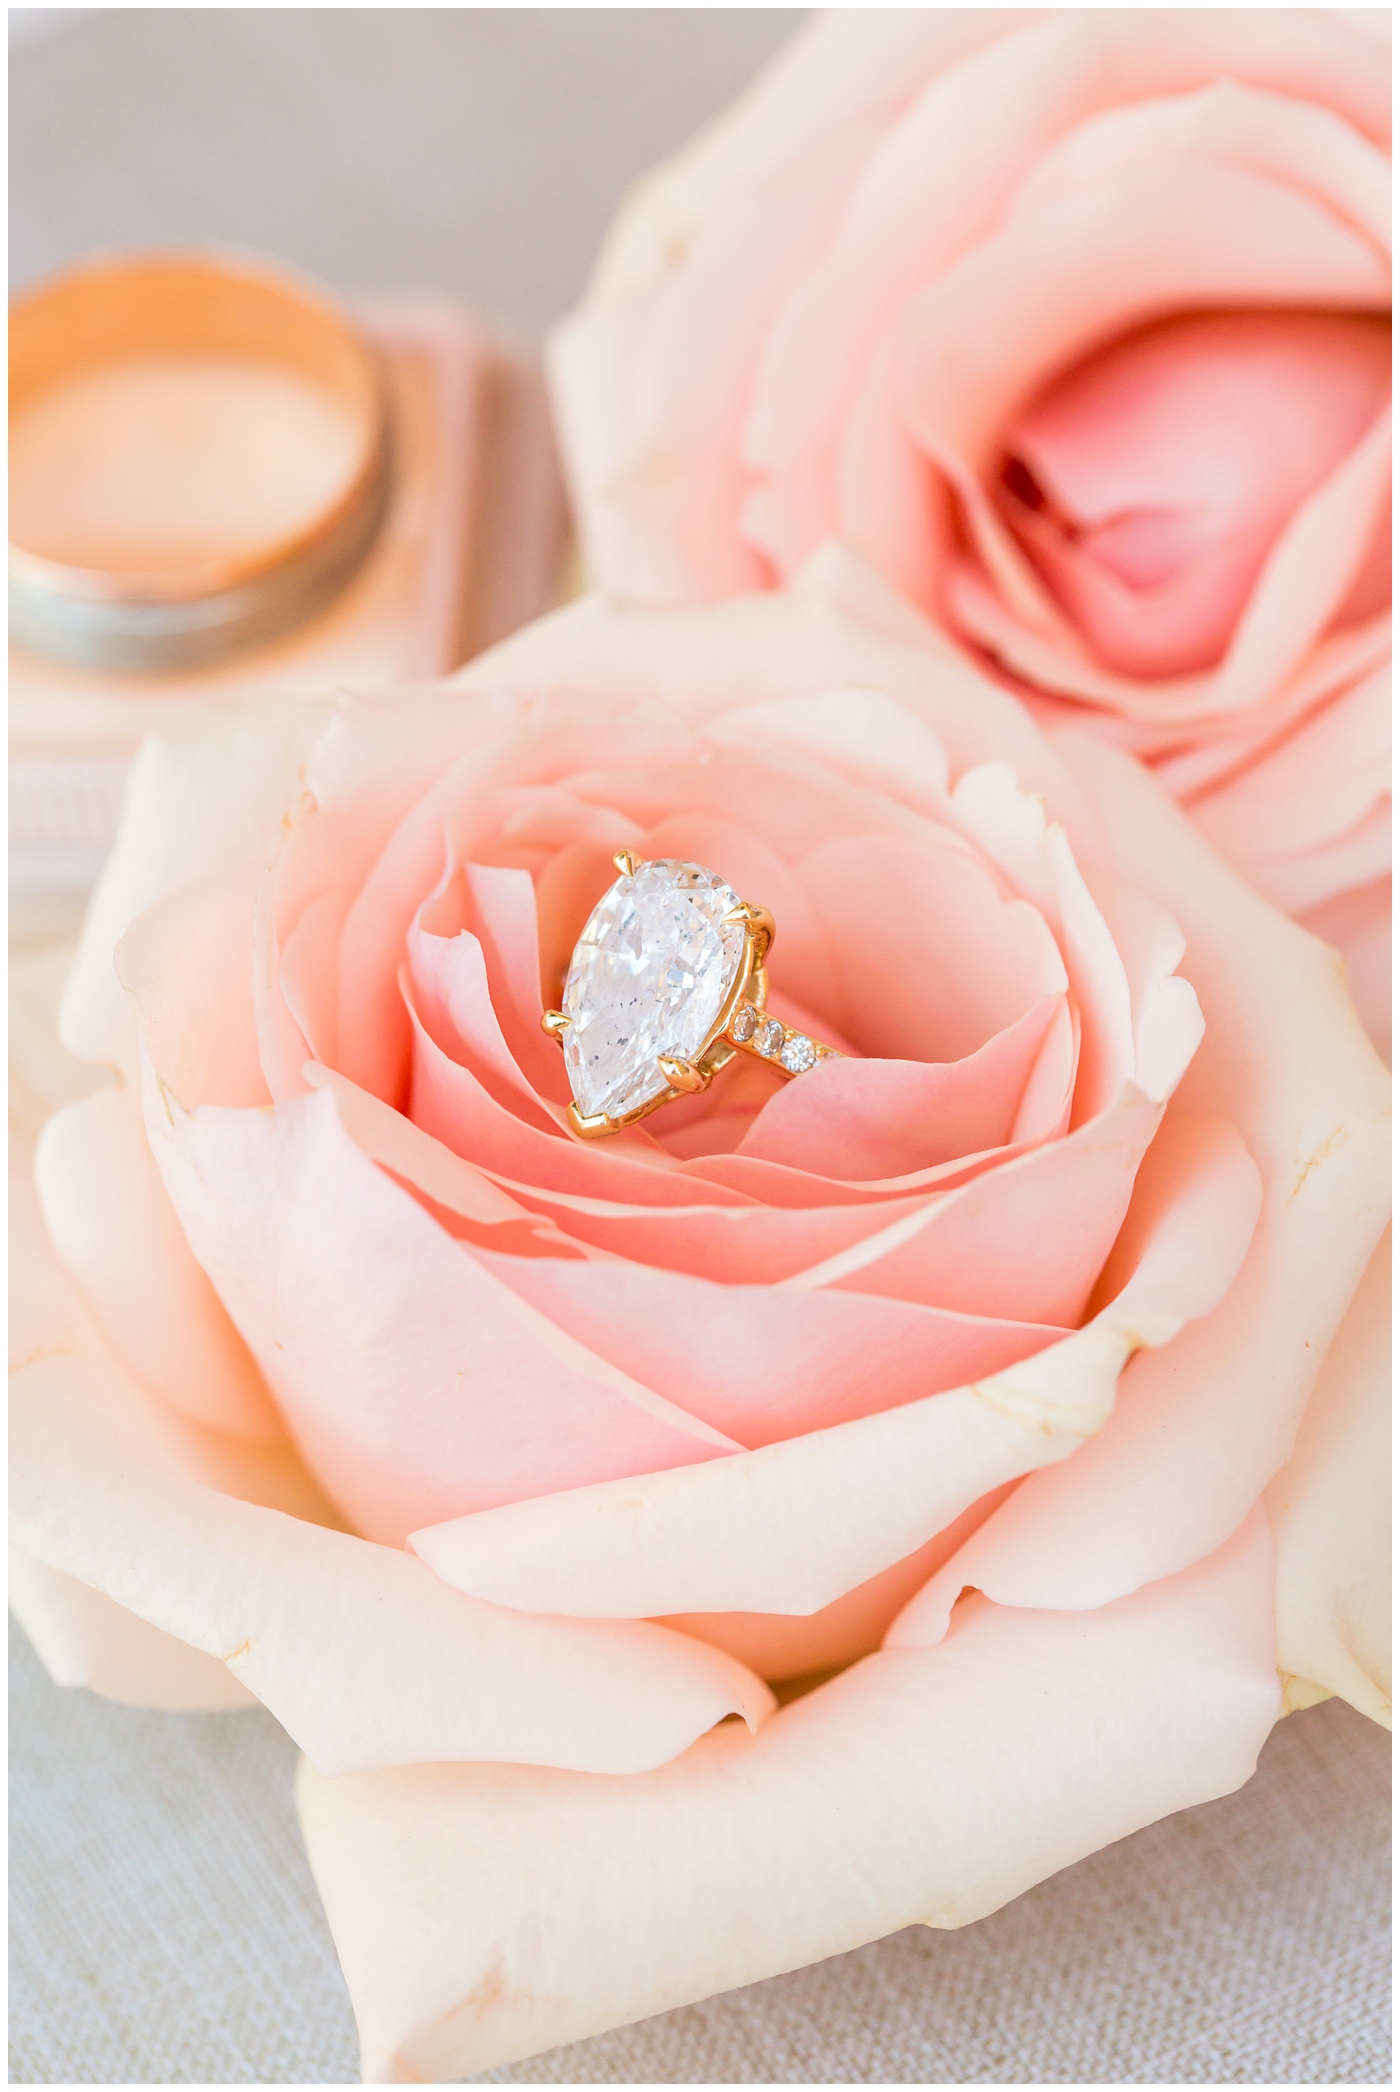 wedding ring on pink rose from bouquet